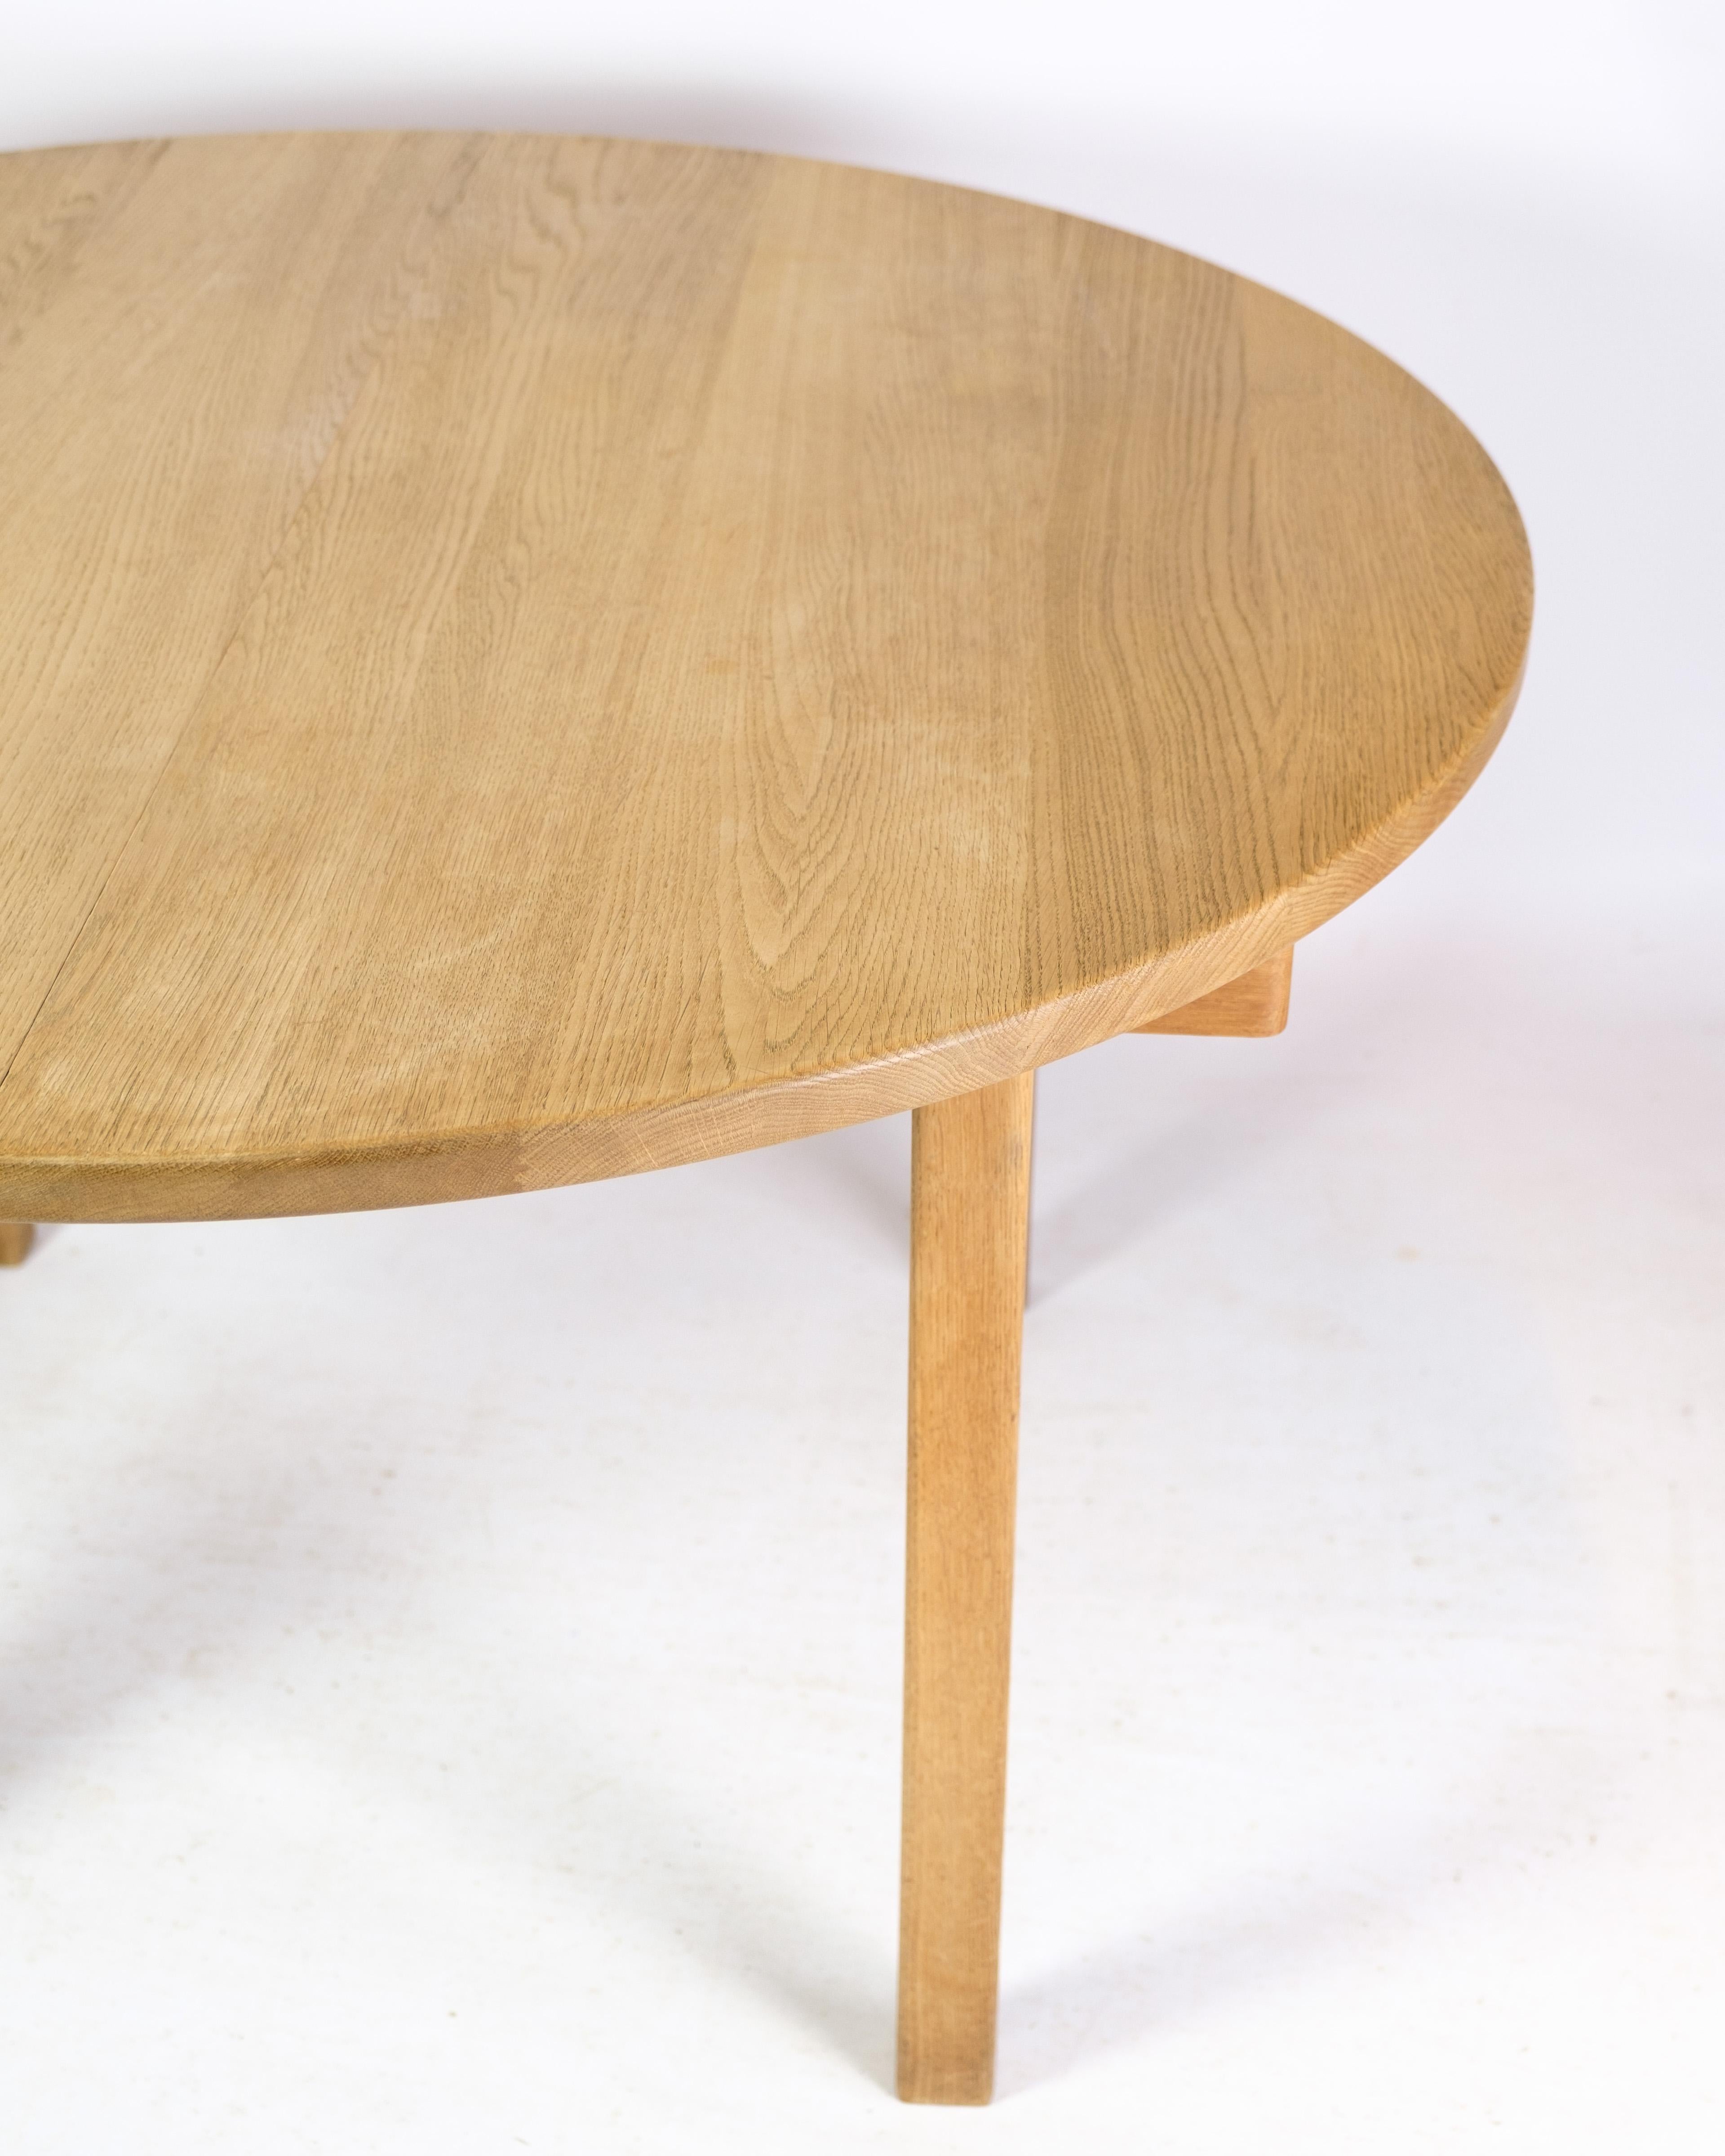 Dining table in solid oak designed by Kurt Østervig from around the 1960s.
Dimensions in cm: height: 72 diameter: 125.
2 Additional plates of 50 cm each. The table will be fully refurbished before any sale.
Great condition.
 